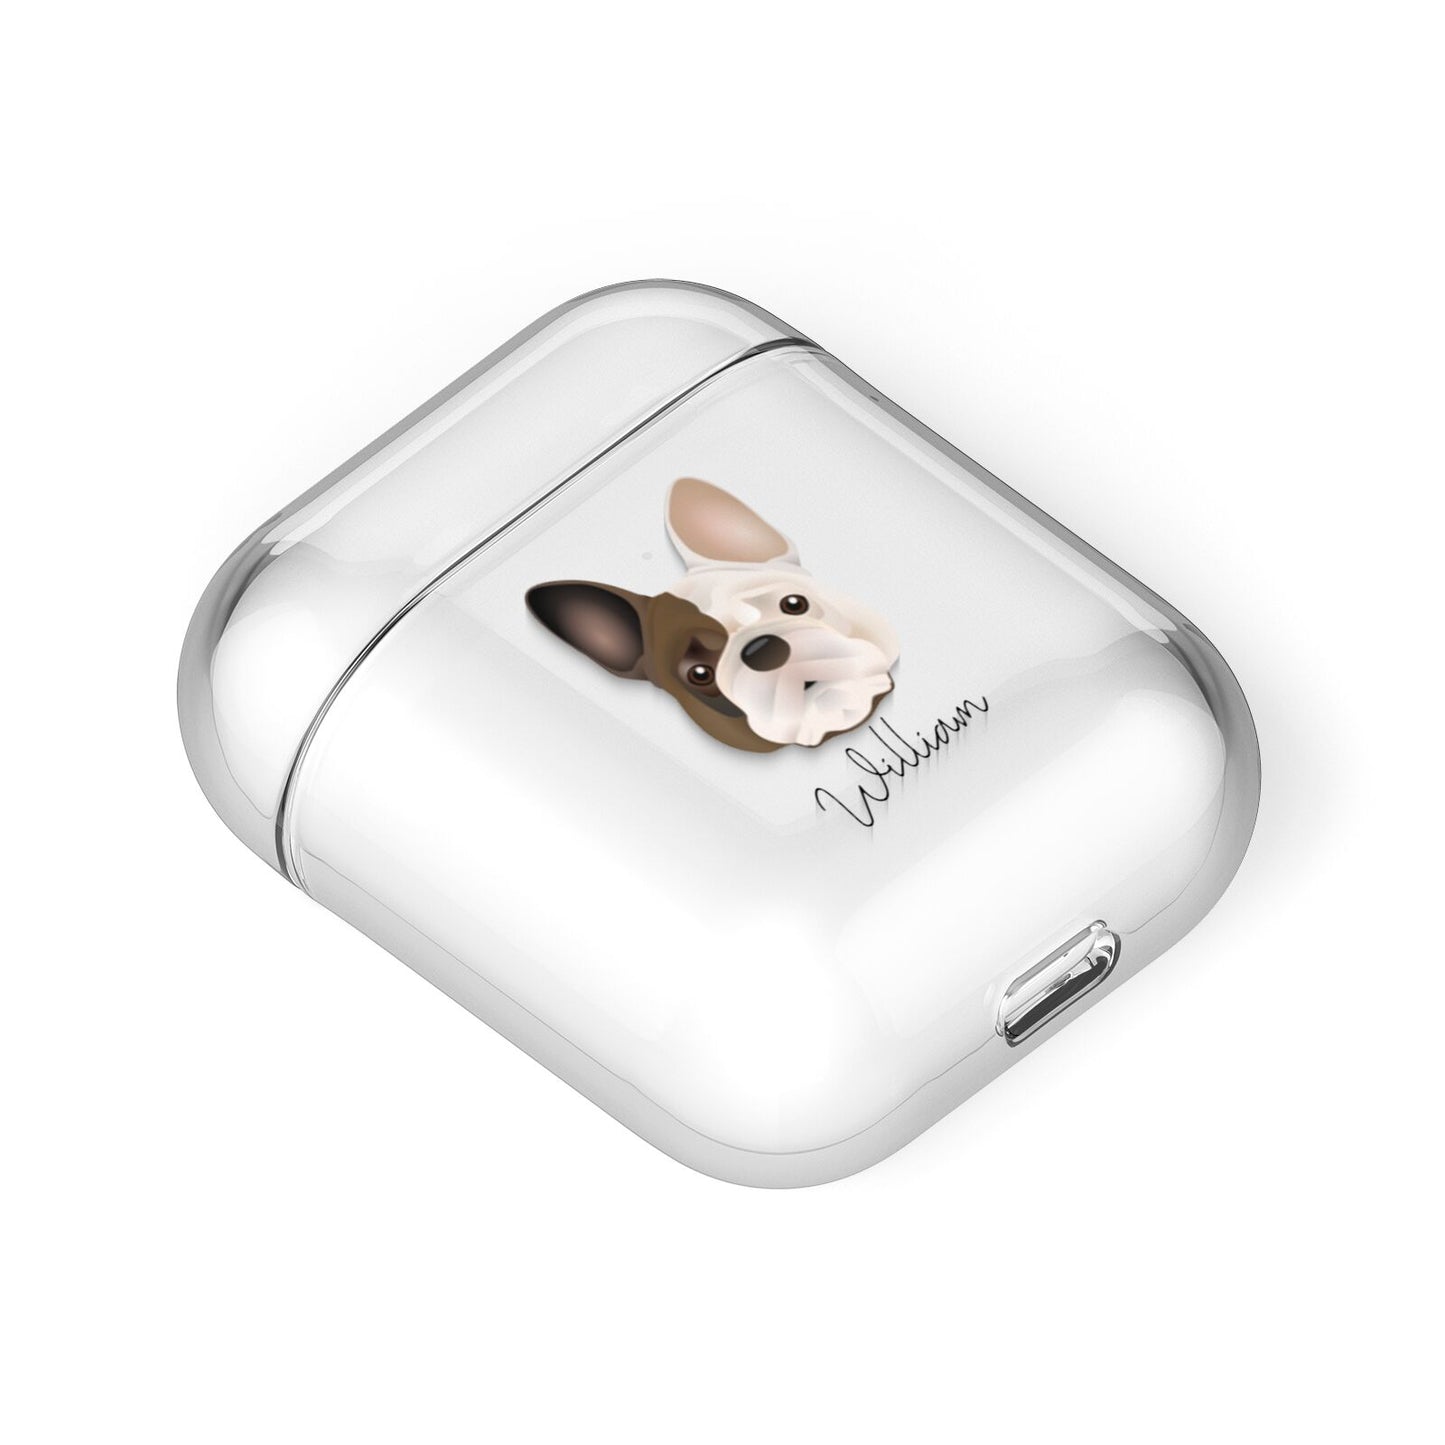 French Bulldog Personalised AirPods Case Laid Flat